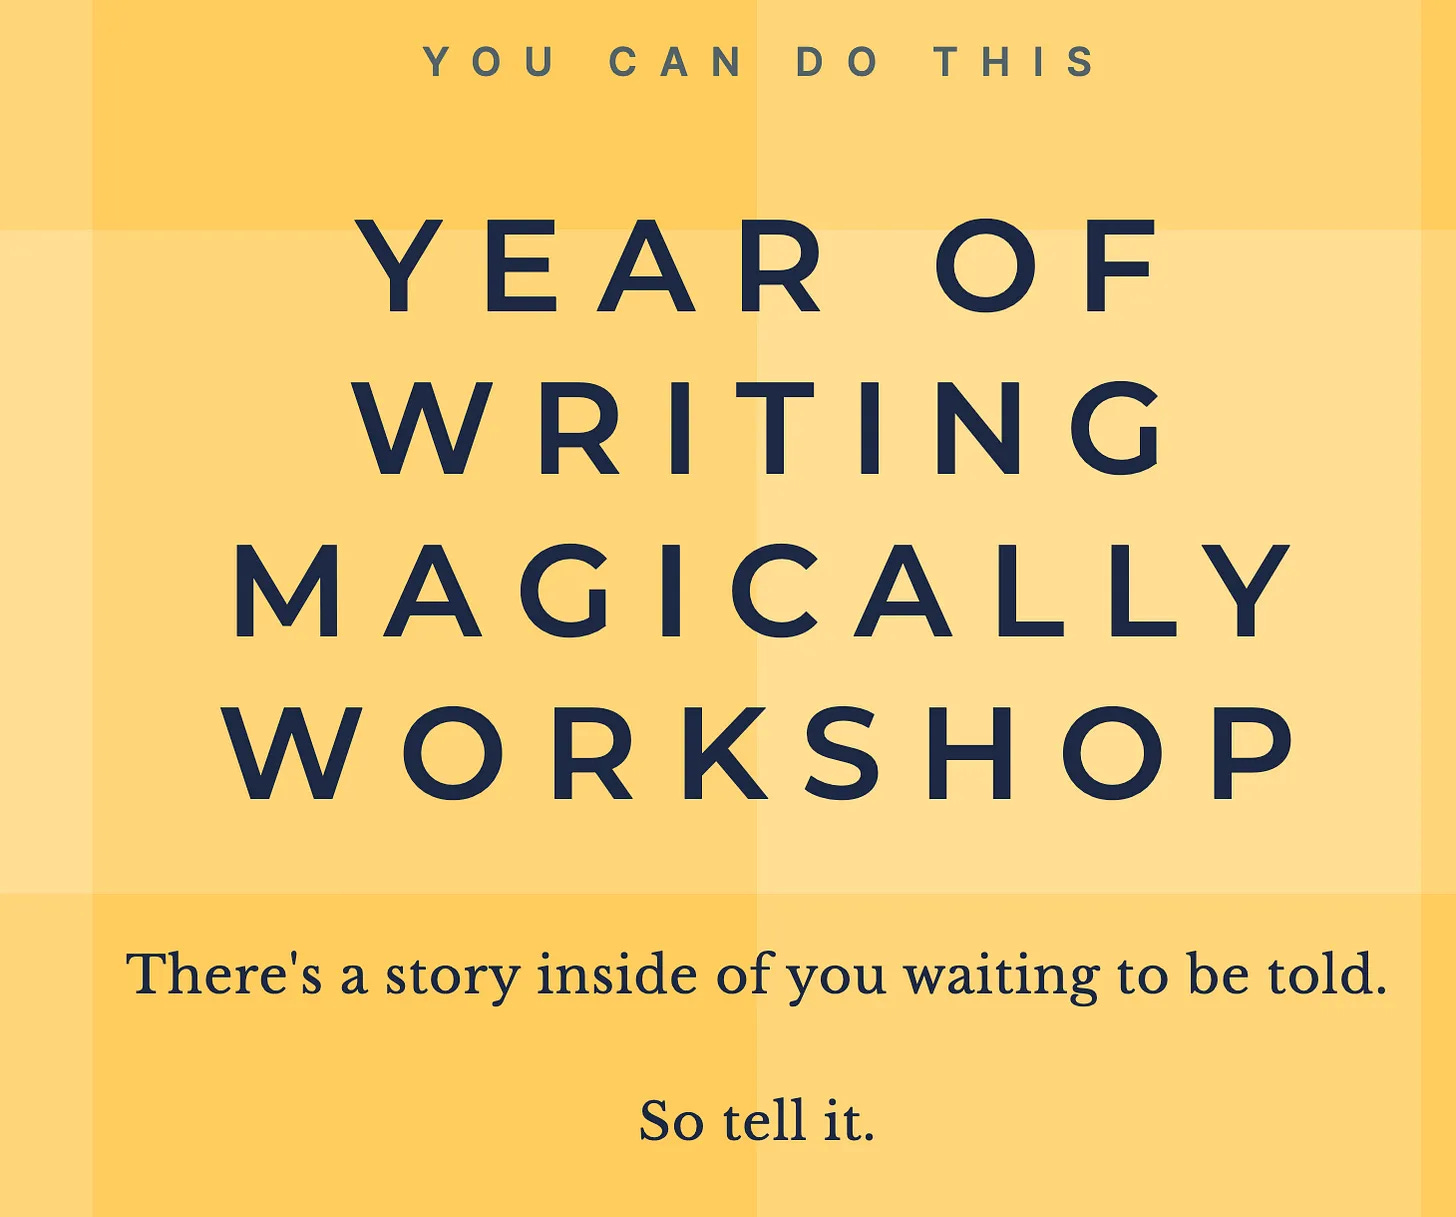 A screenshot of the Year of Writing Magically website, which says, "You can do this. Year of Writing Magically. There's a story inside of you waiting to be told. So tell it."